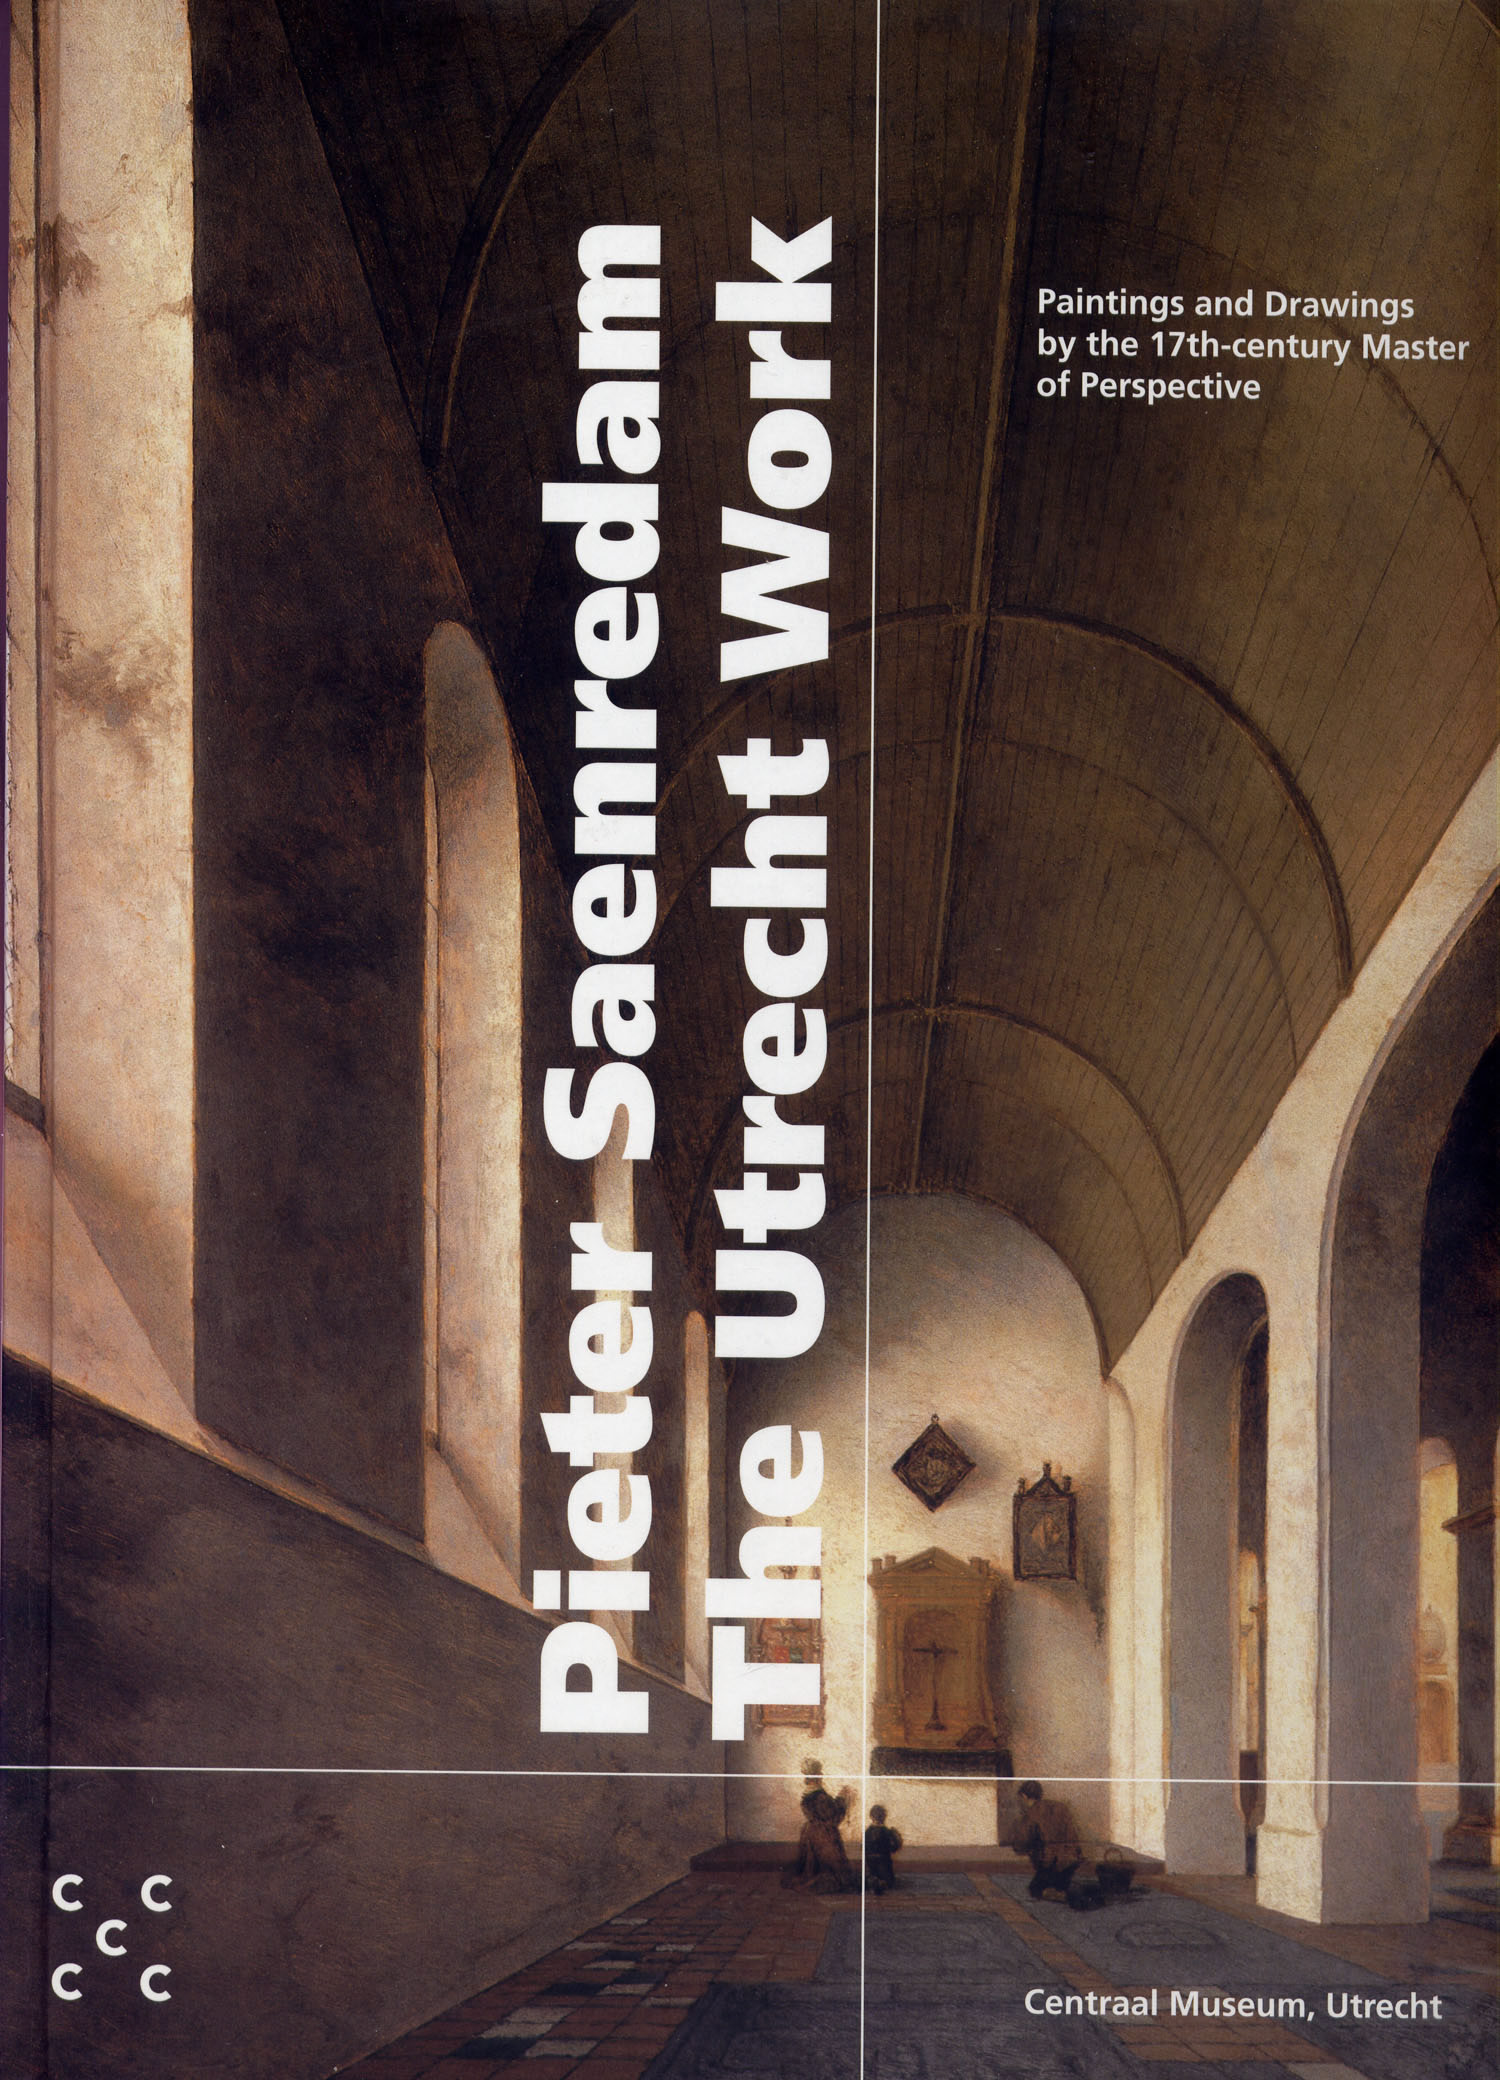 Wim Crouwel: Pieter Saenredam. The Utrecht Work. Paintings and Drawings by the 17th-century Master of Perspective. 2000